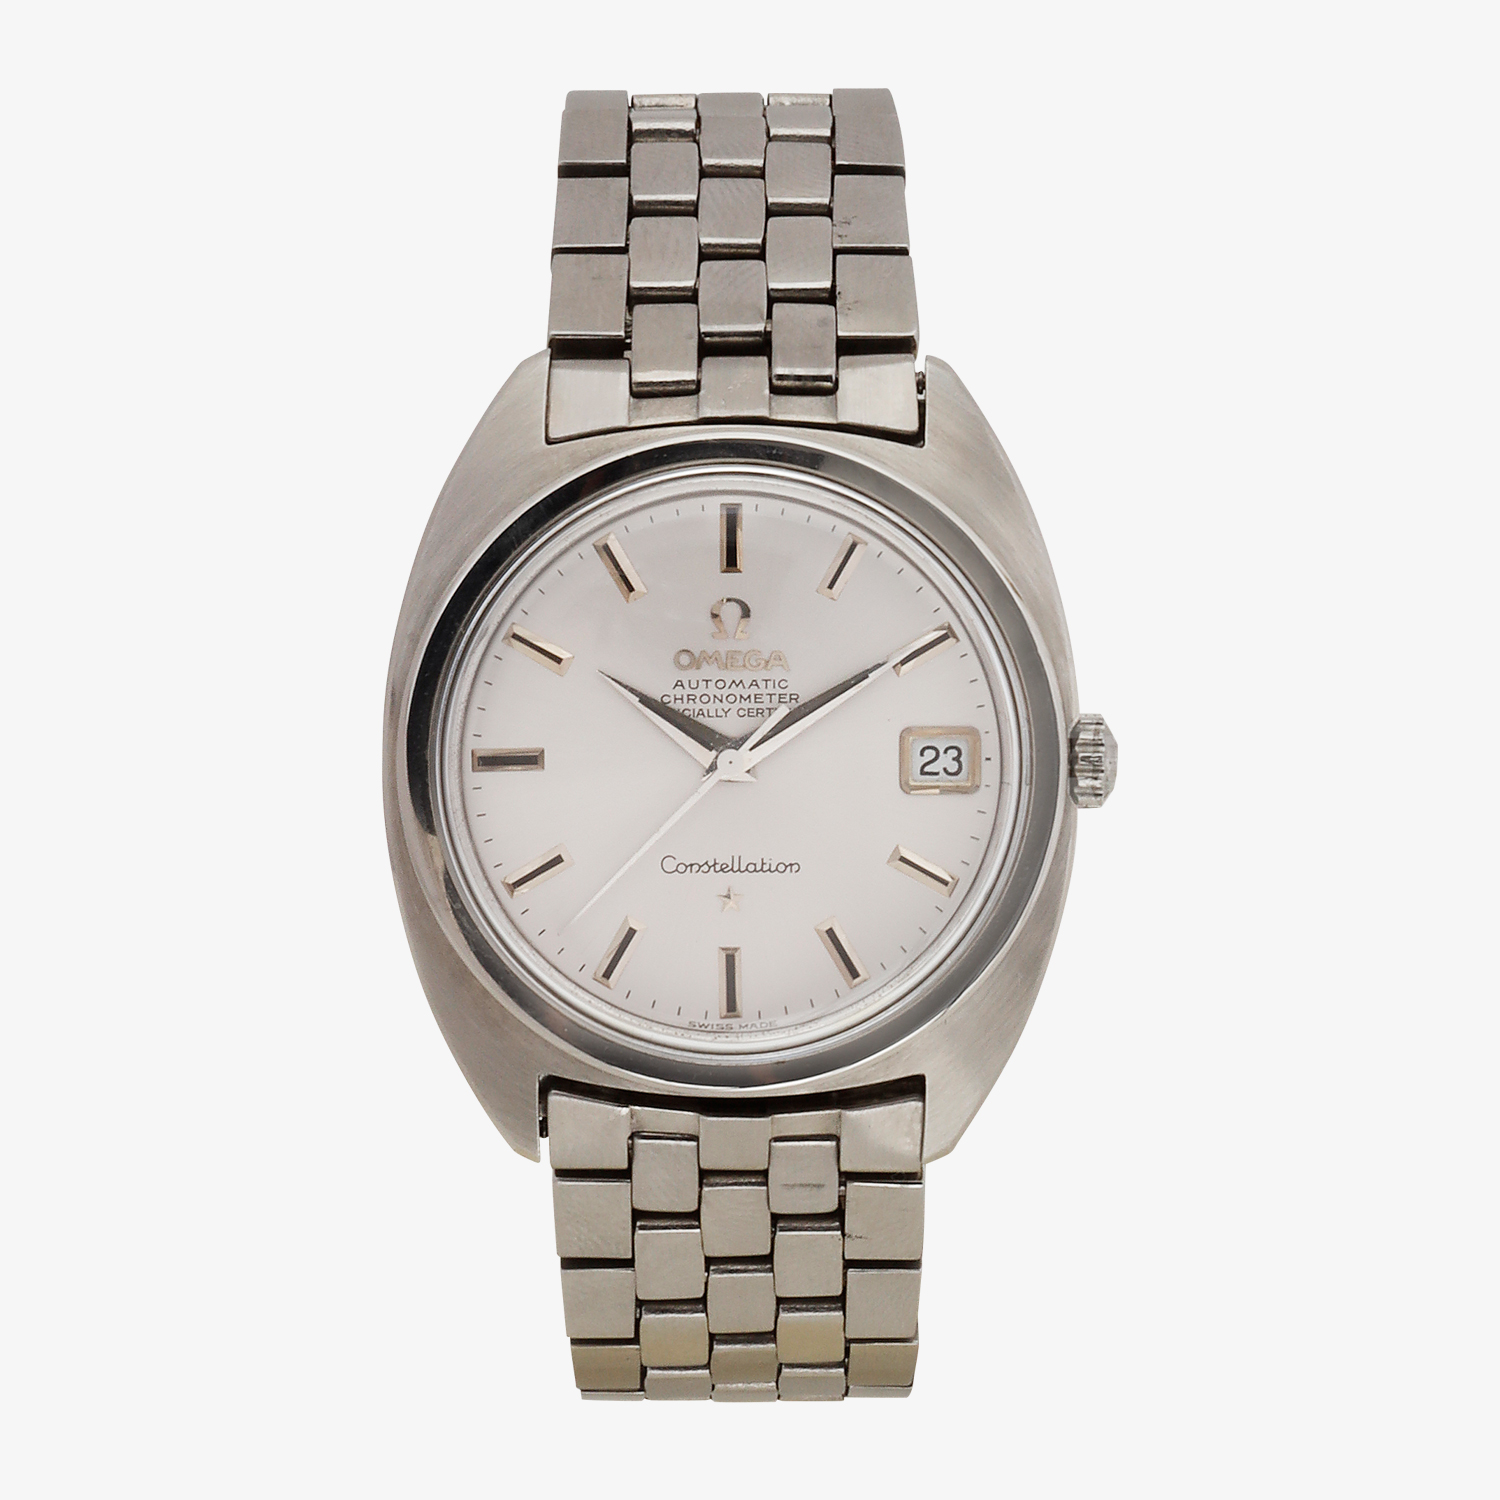 OMEGA (Vintage Watch)｜OMEGA｜Constellation｜Automatic - 70's ...